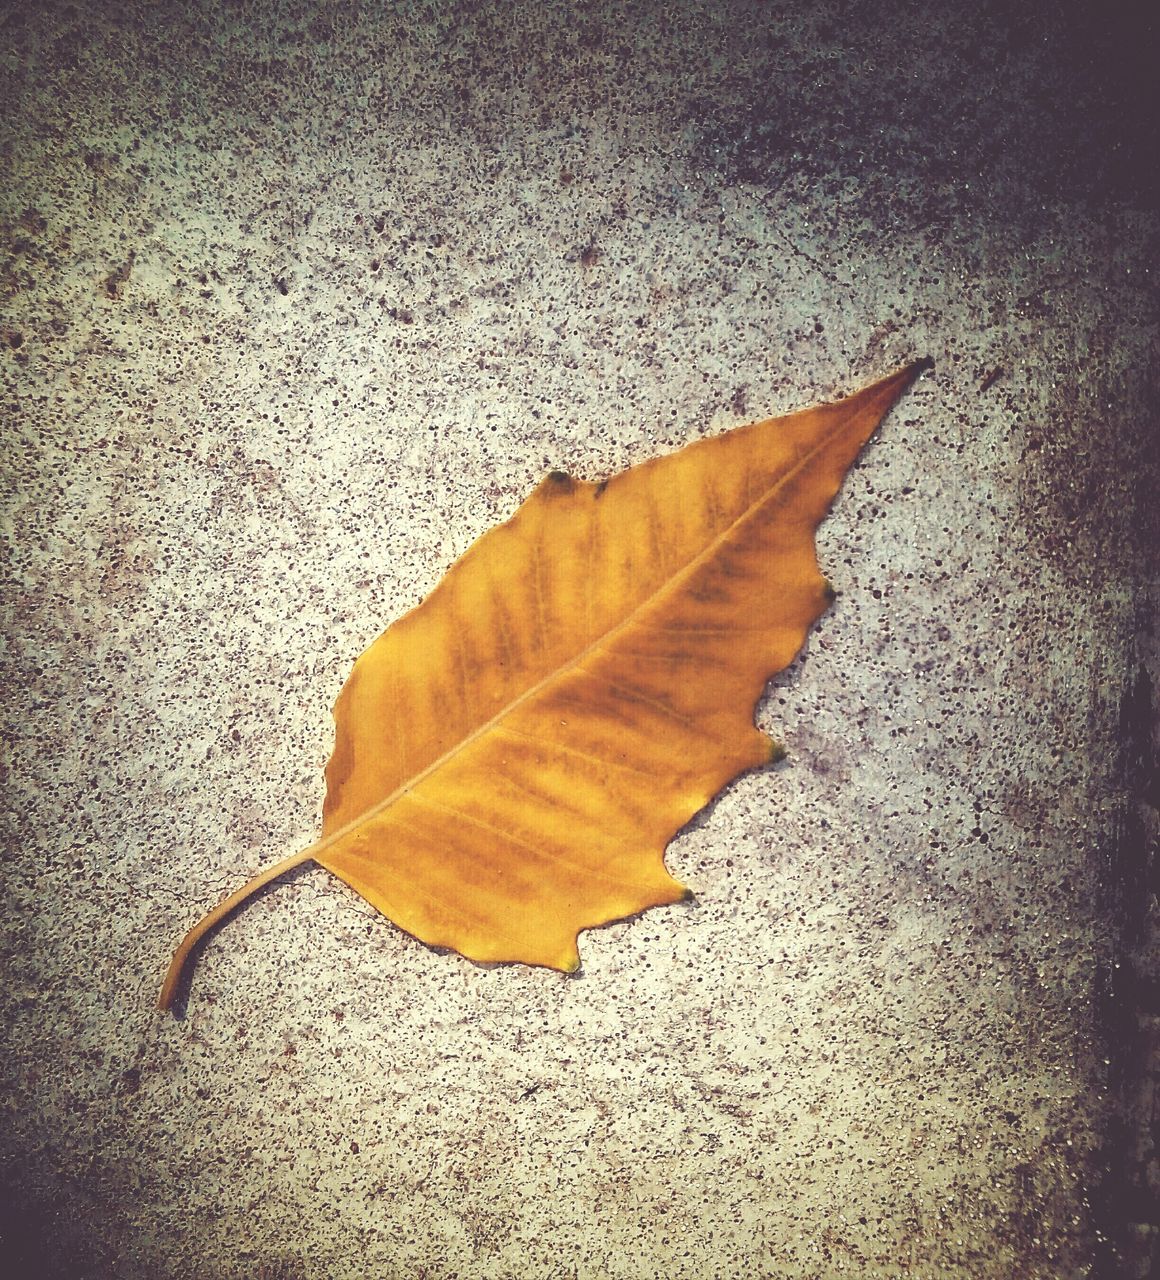 leaf, dry, high angle view, autumn, asphalt, street, close-up, ground, single object, textured, leaf vein, fallen, change, season, nature, road, fragility, natural pattern, still life, no people